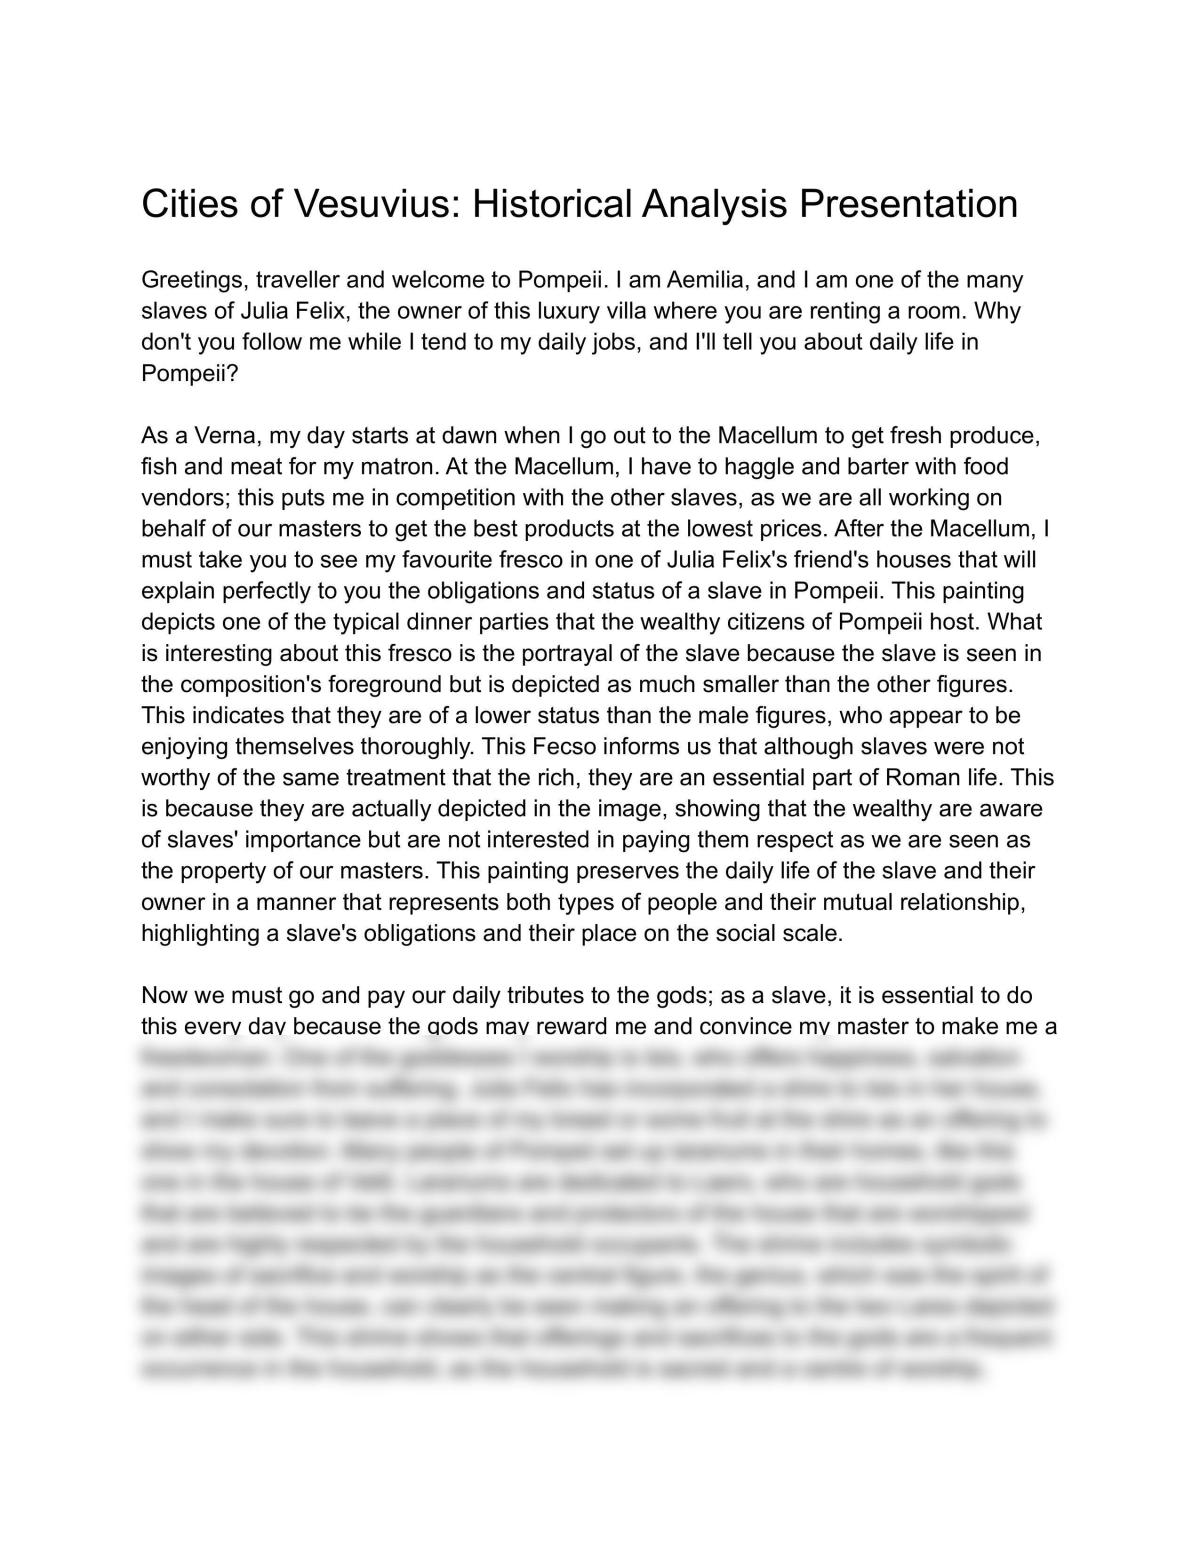 Oral Historical Analysis Presentation On Cities of Vesuvius  - Page 1